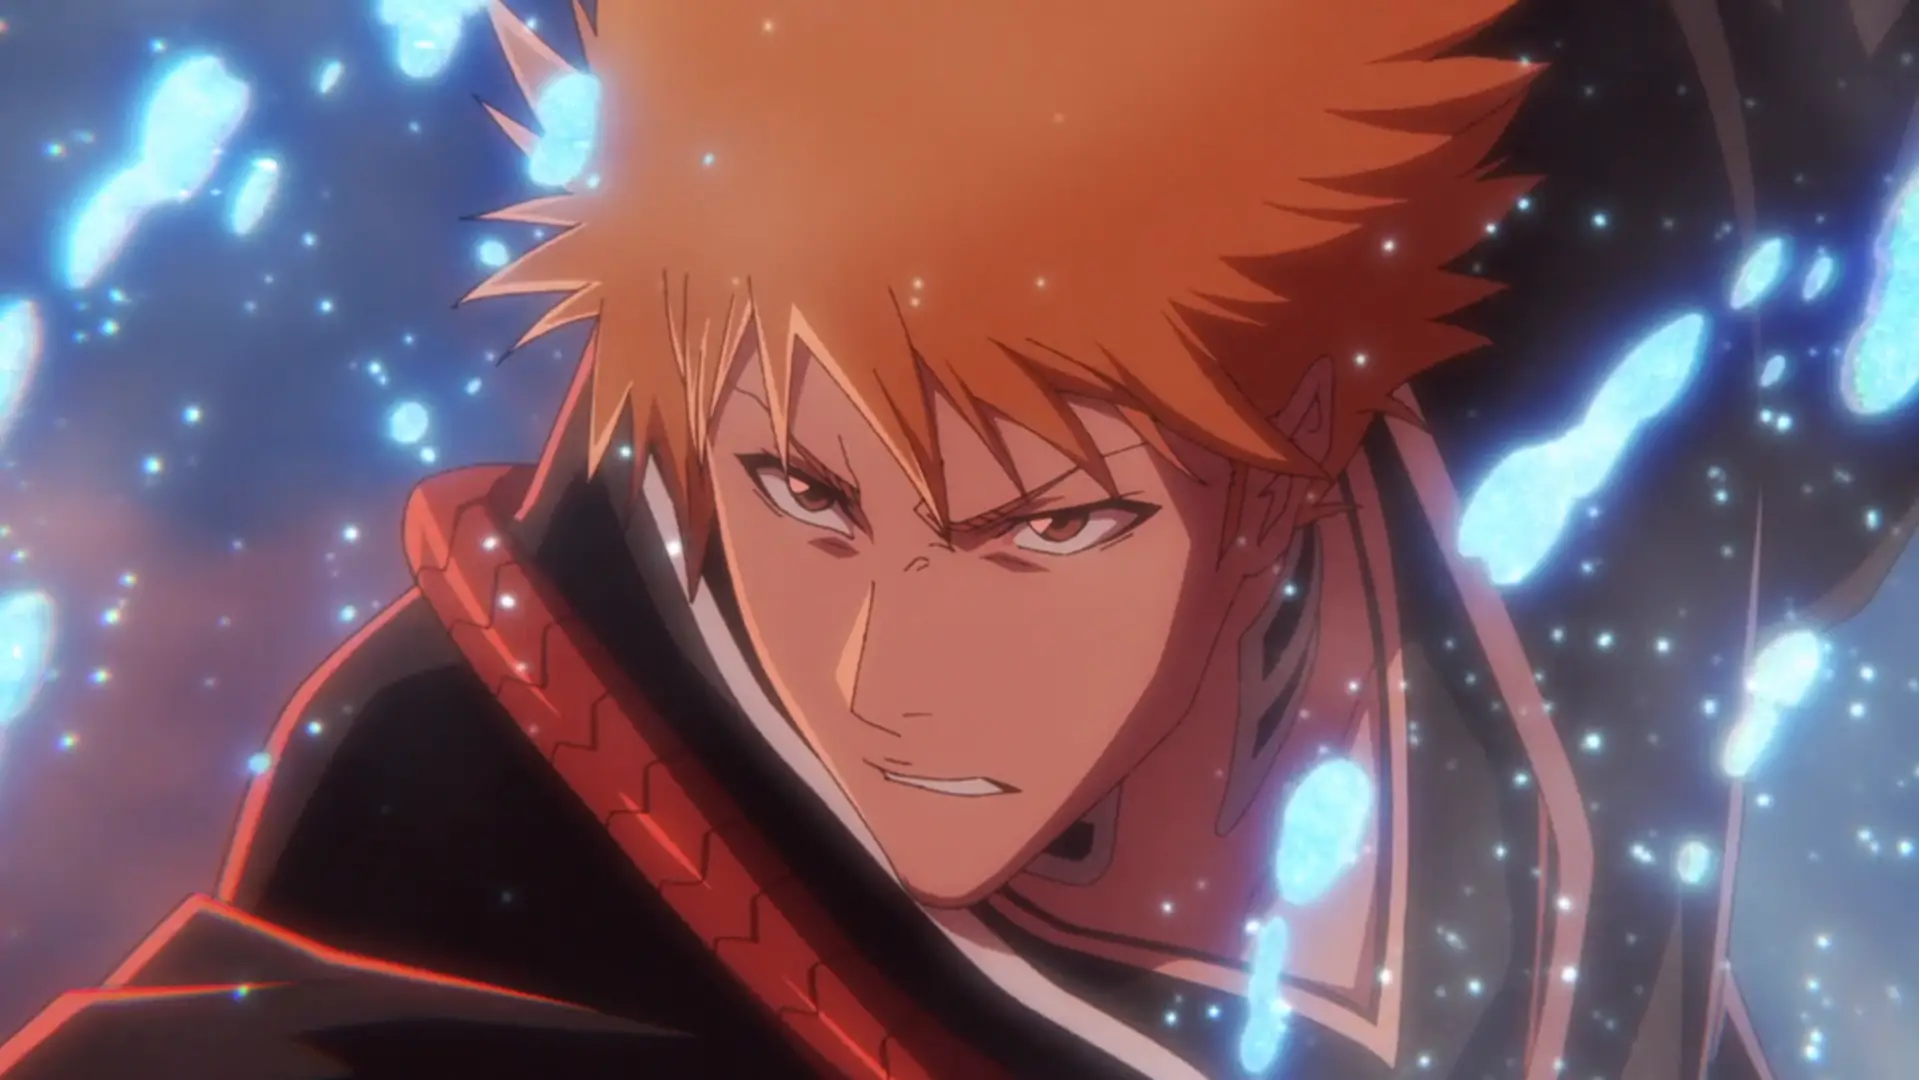 Bleach TYBW Episode 16 Spoilers and Preview